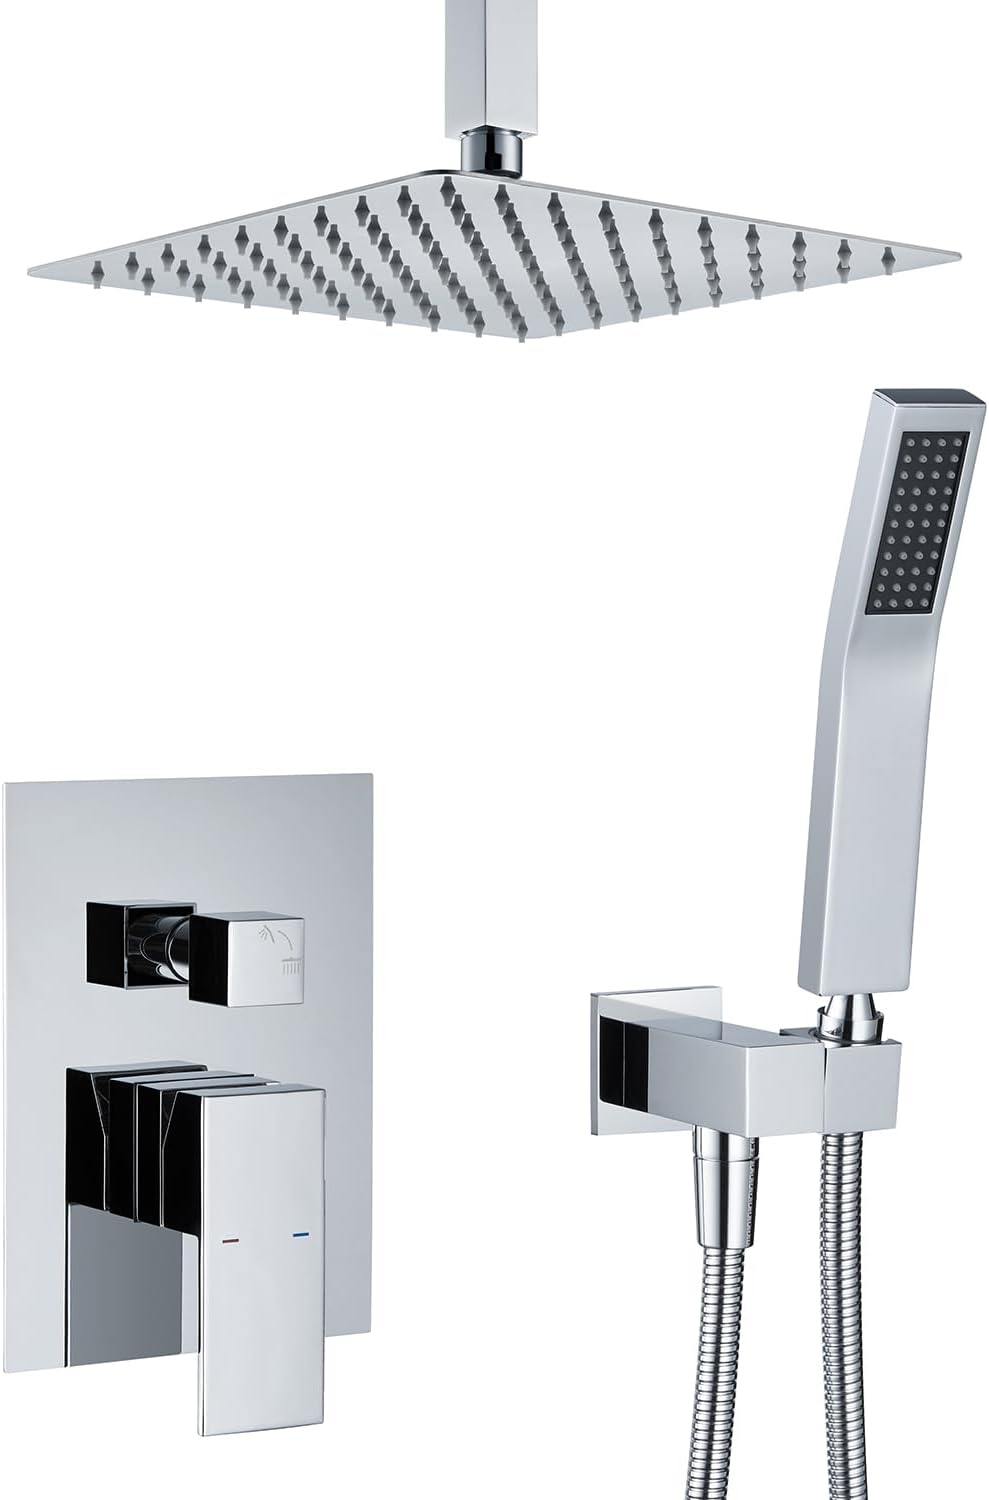 Artiqua Rain Shower System 10 Inches Shower Combo Set Chrome Ceiling Mount Shower Faucet Bathroom Faucets with Rainfall Shower Head and Hand Shower (Chrome)